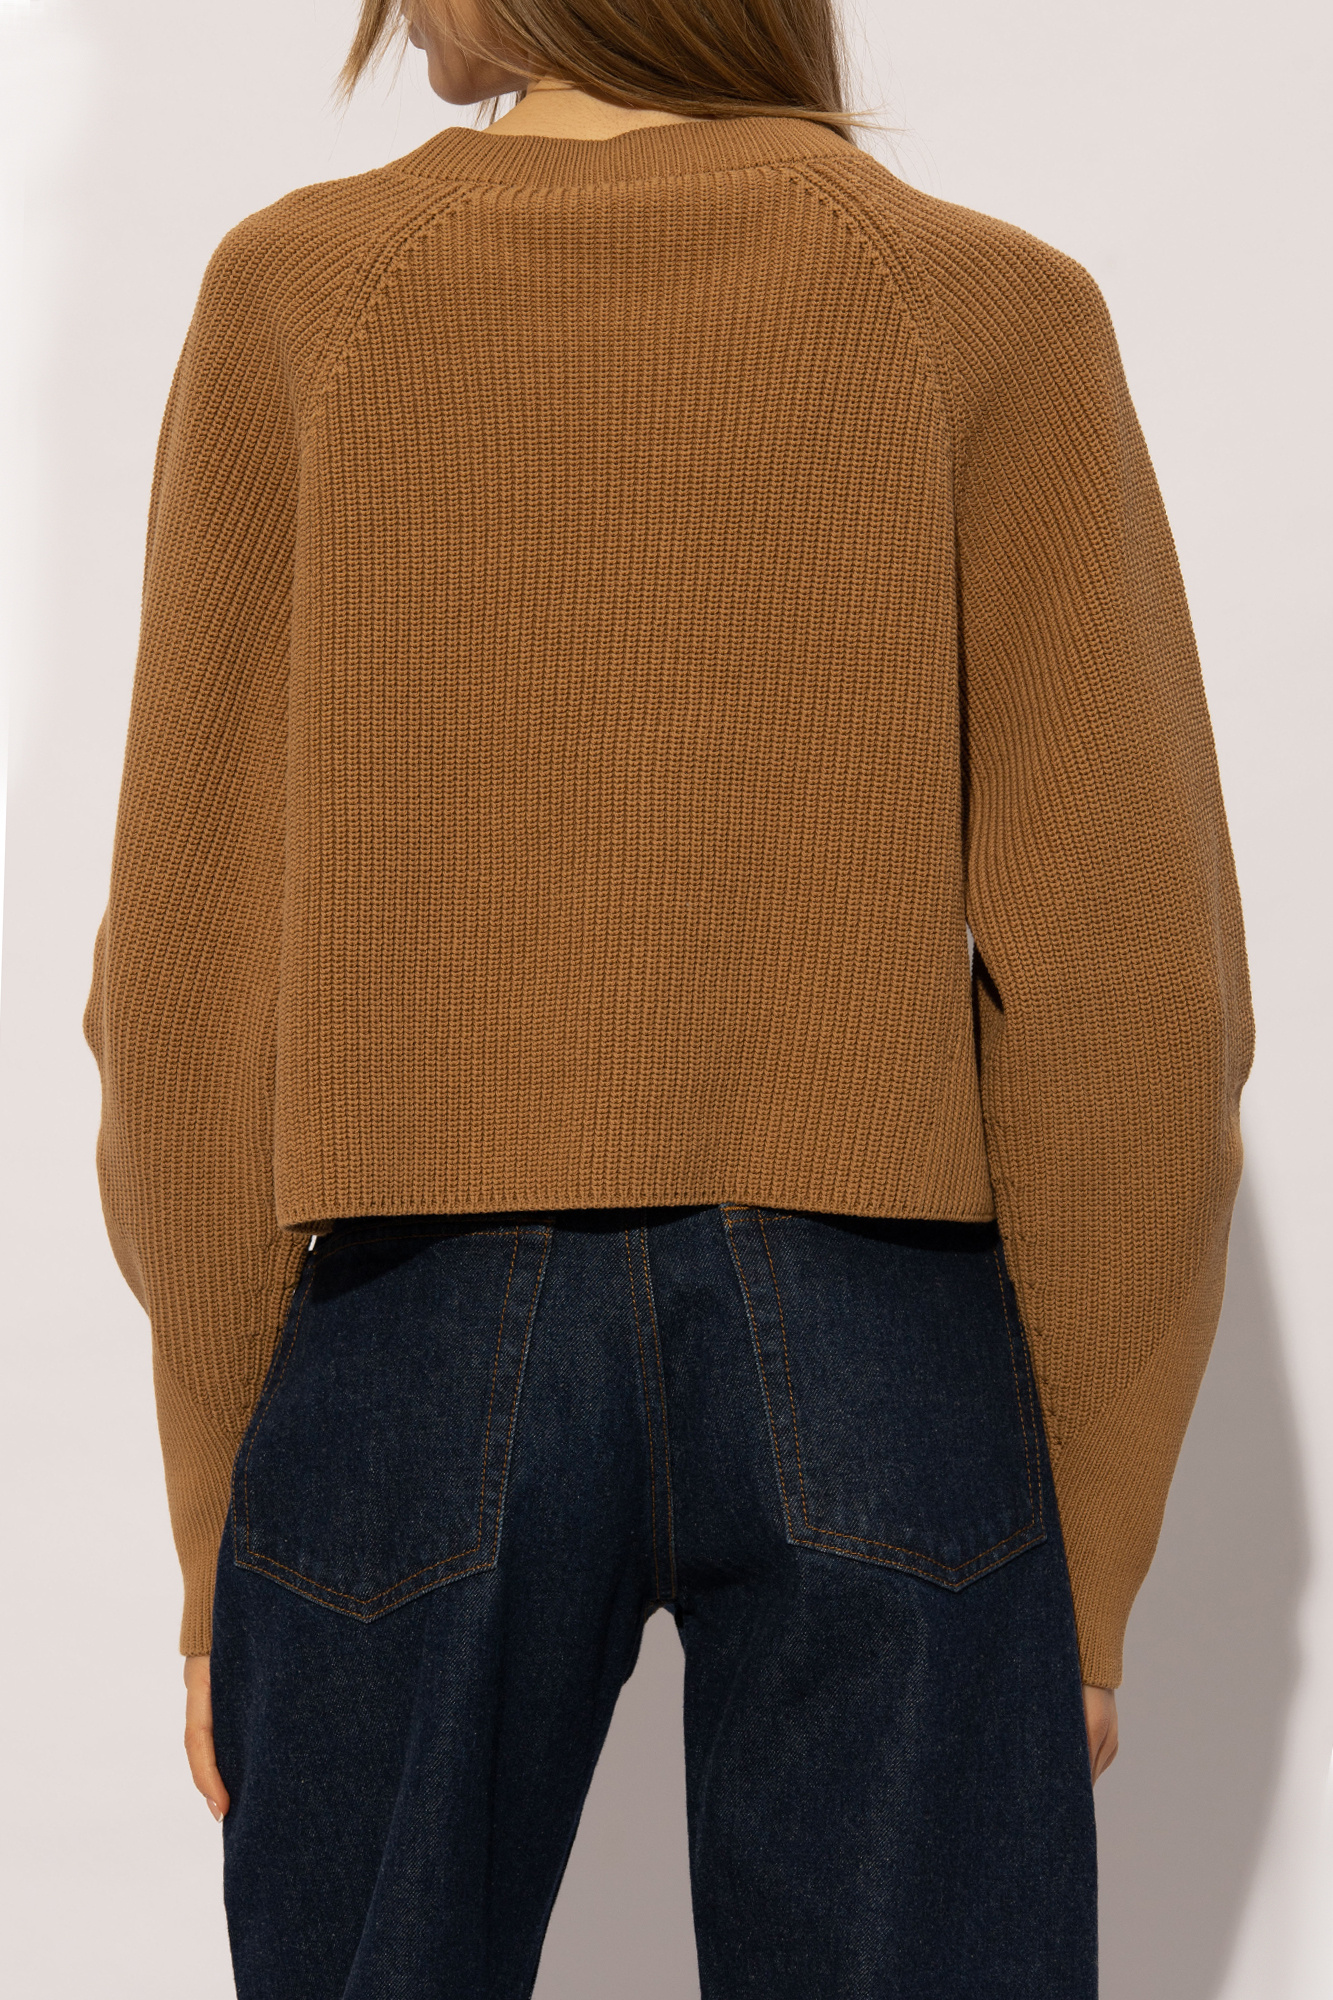 Gucci Short cardigan in cotton